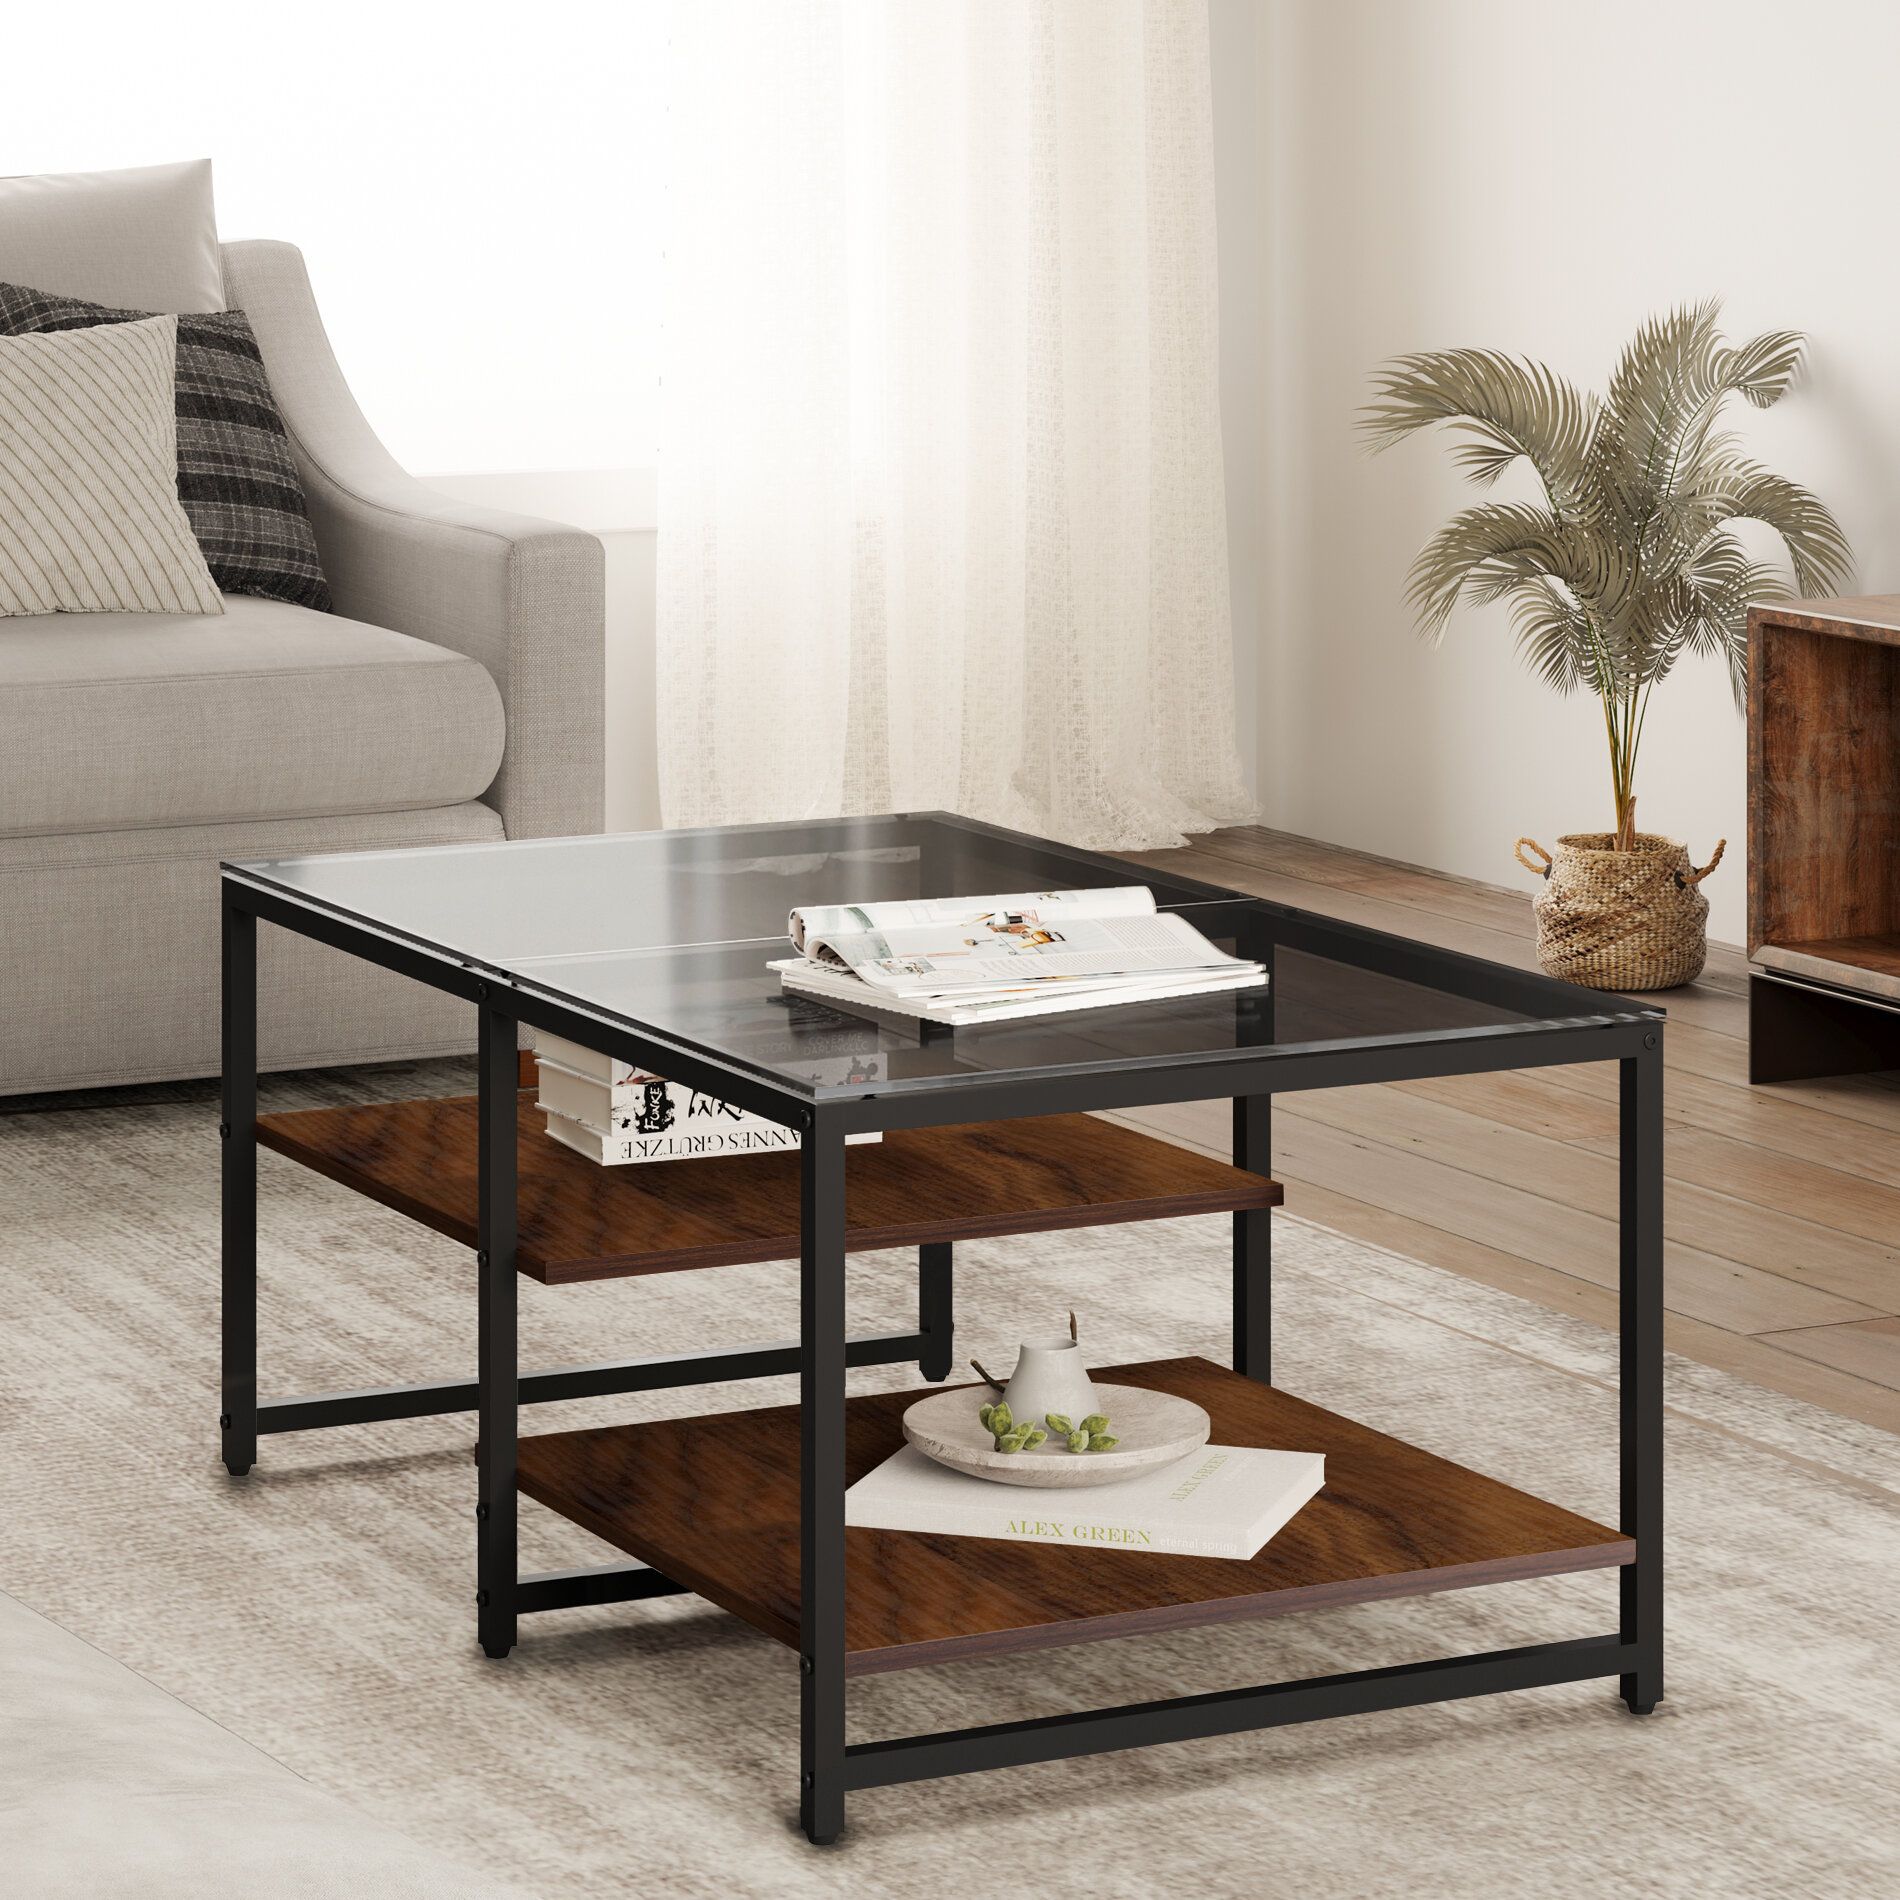 17 Stories Keian Morden Glass Coffee Table With Storage Shelf Shelves, 39.3  X 23.6 X  (View 2 of 15)